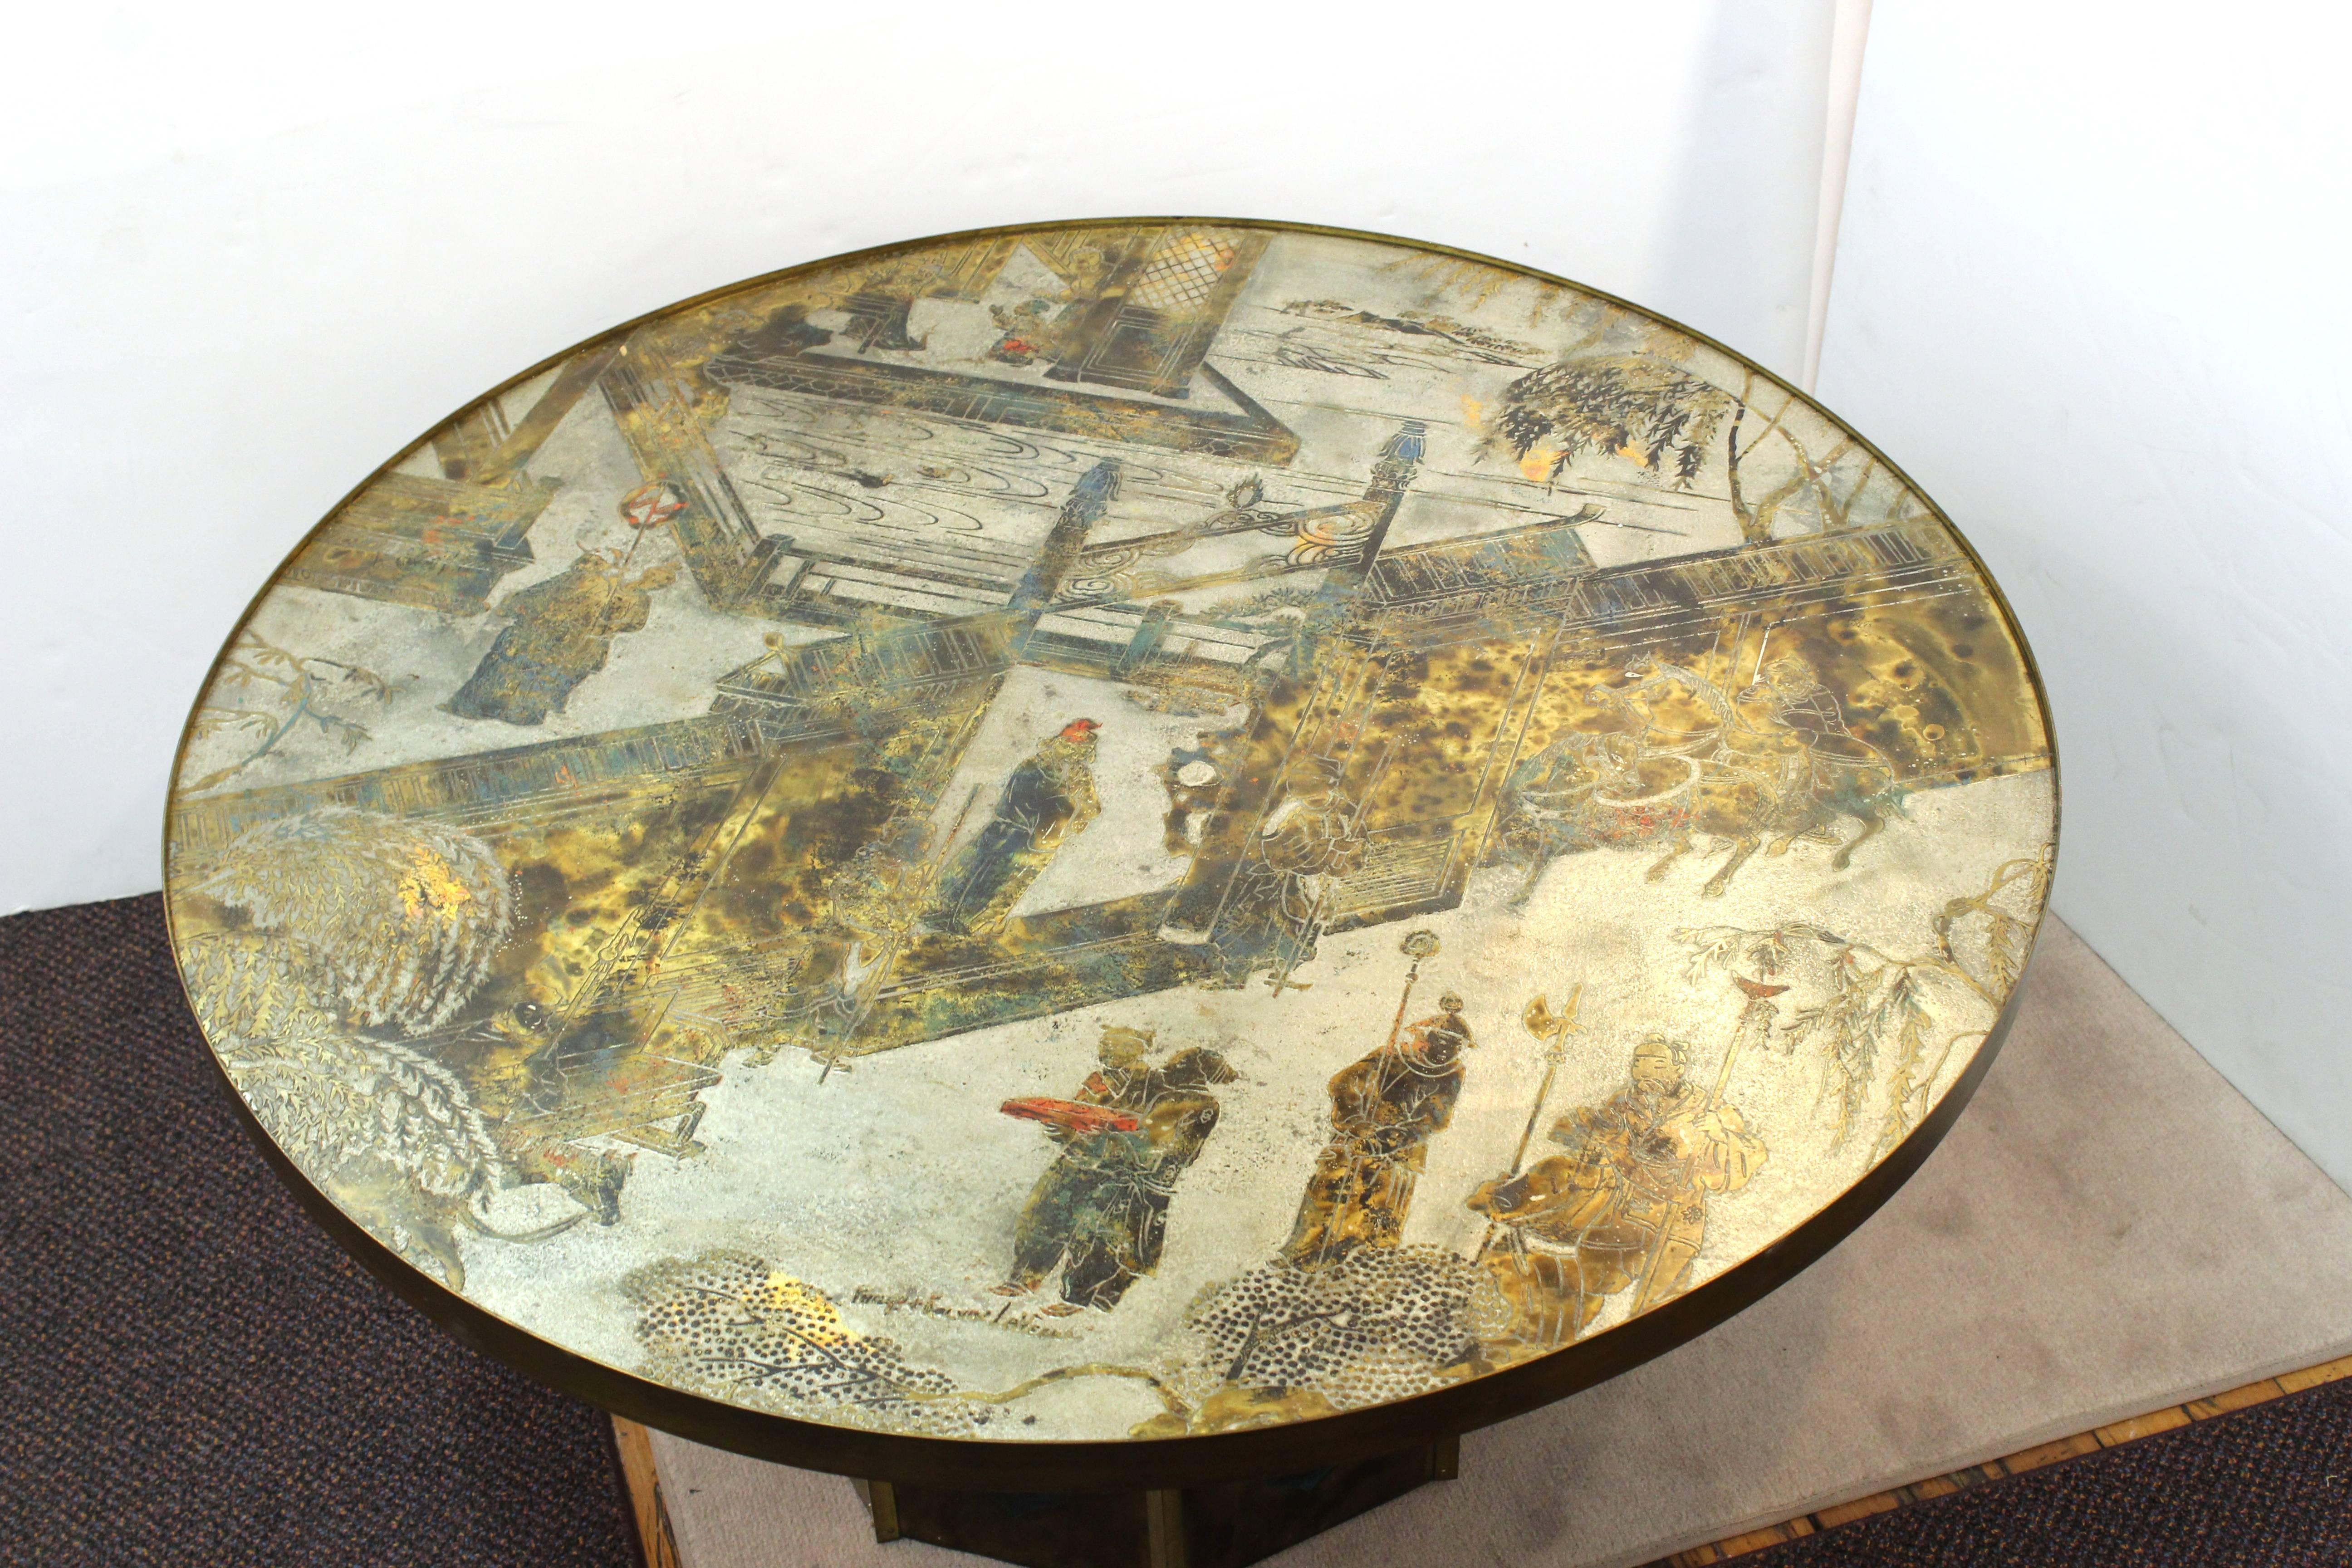 An end table designed in the chinoiserie style by Philip and Kelvin LaVerne during the Mid-20th century. Signed on the table face. In very good condition.